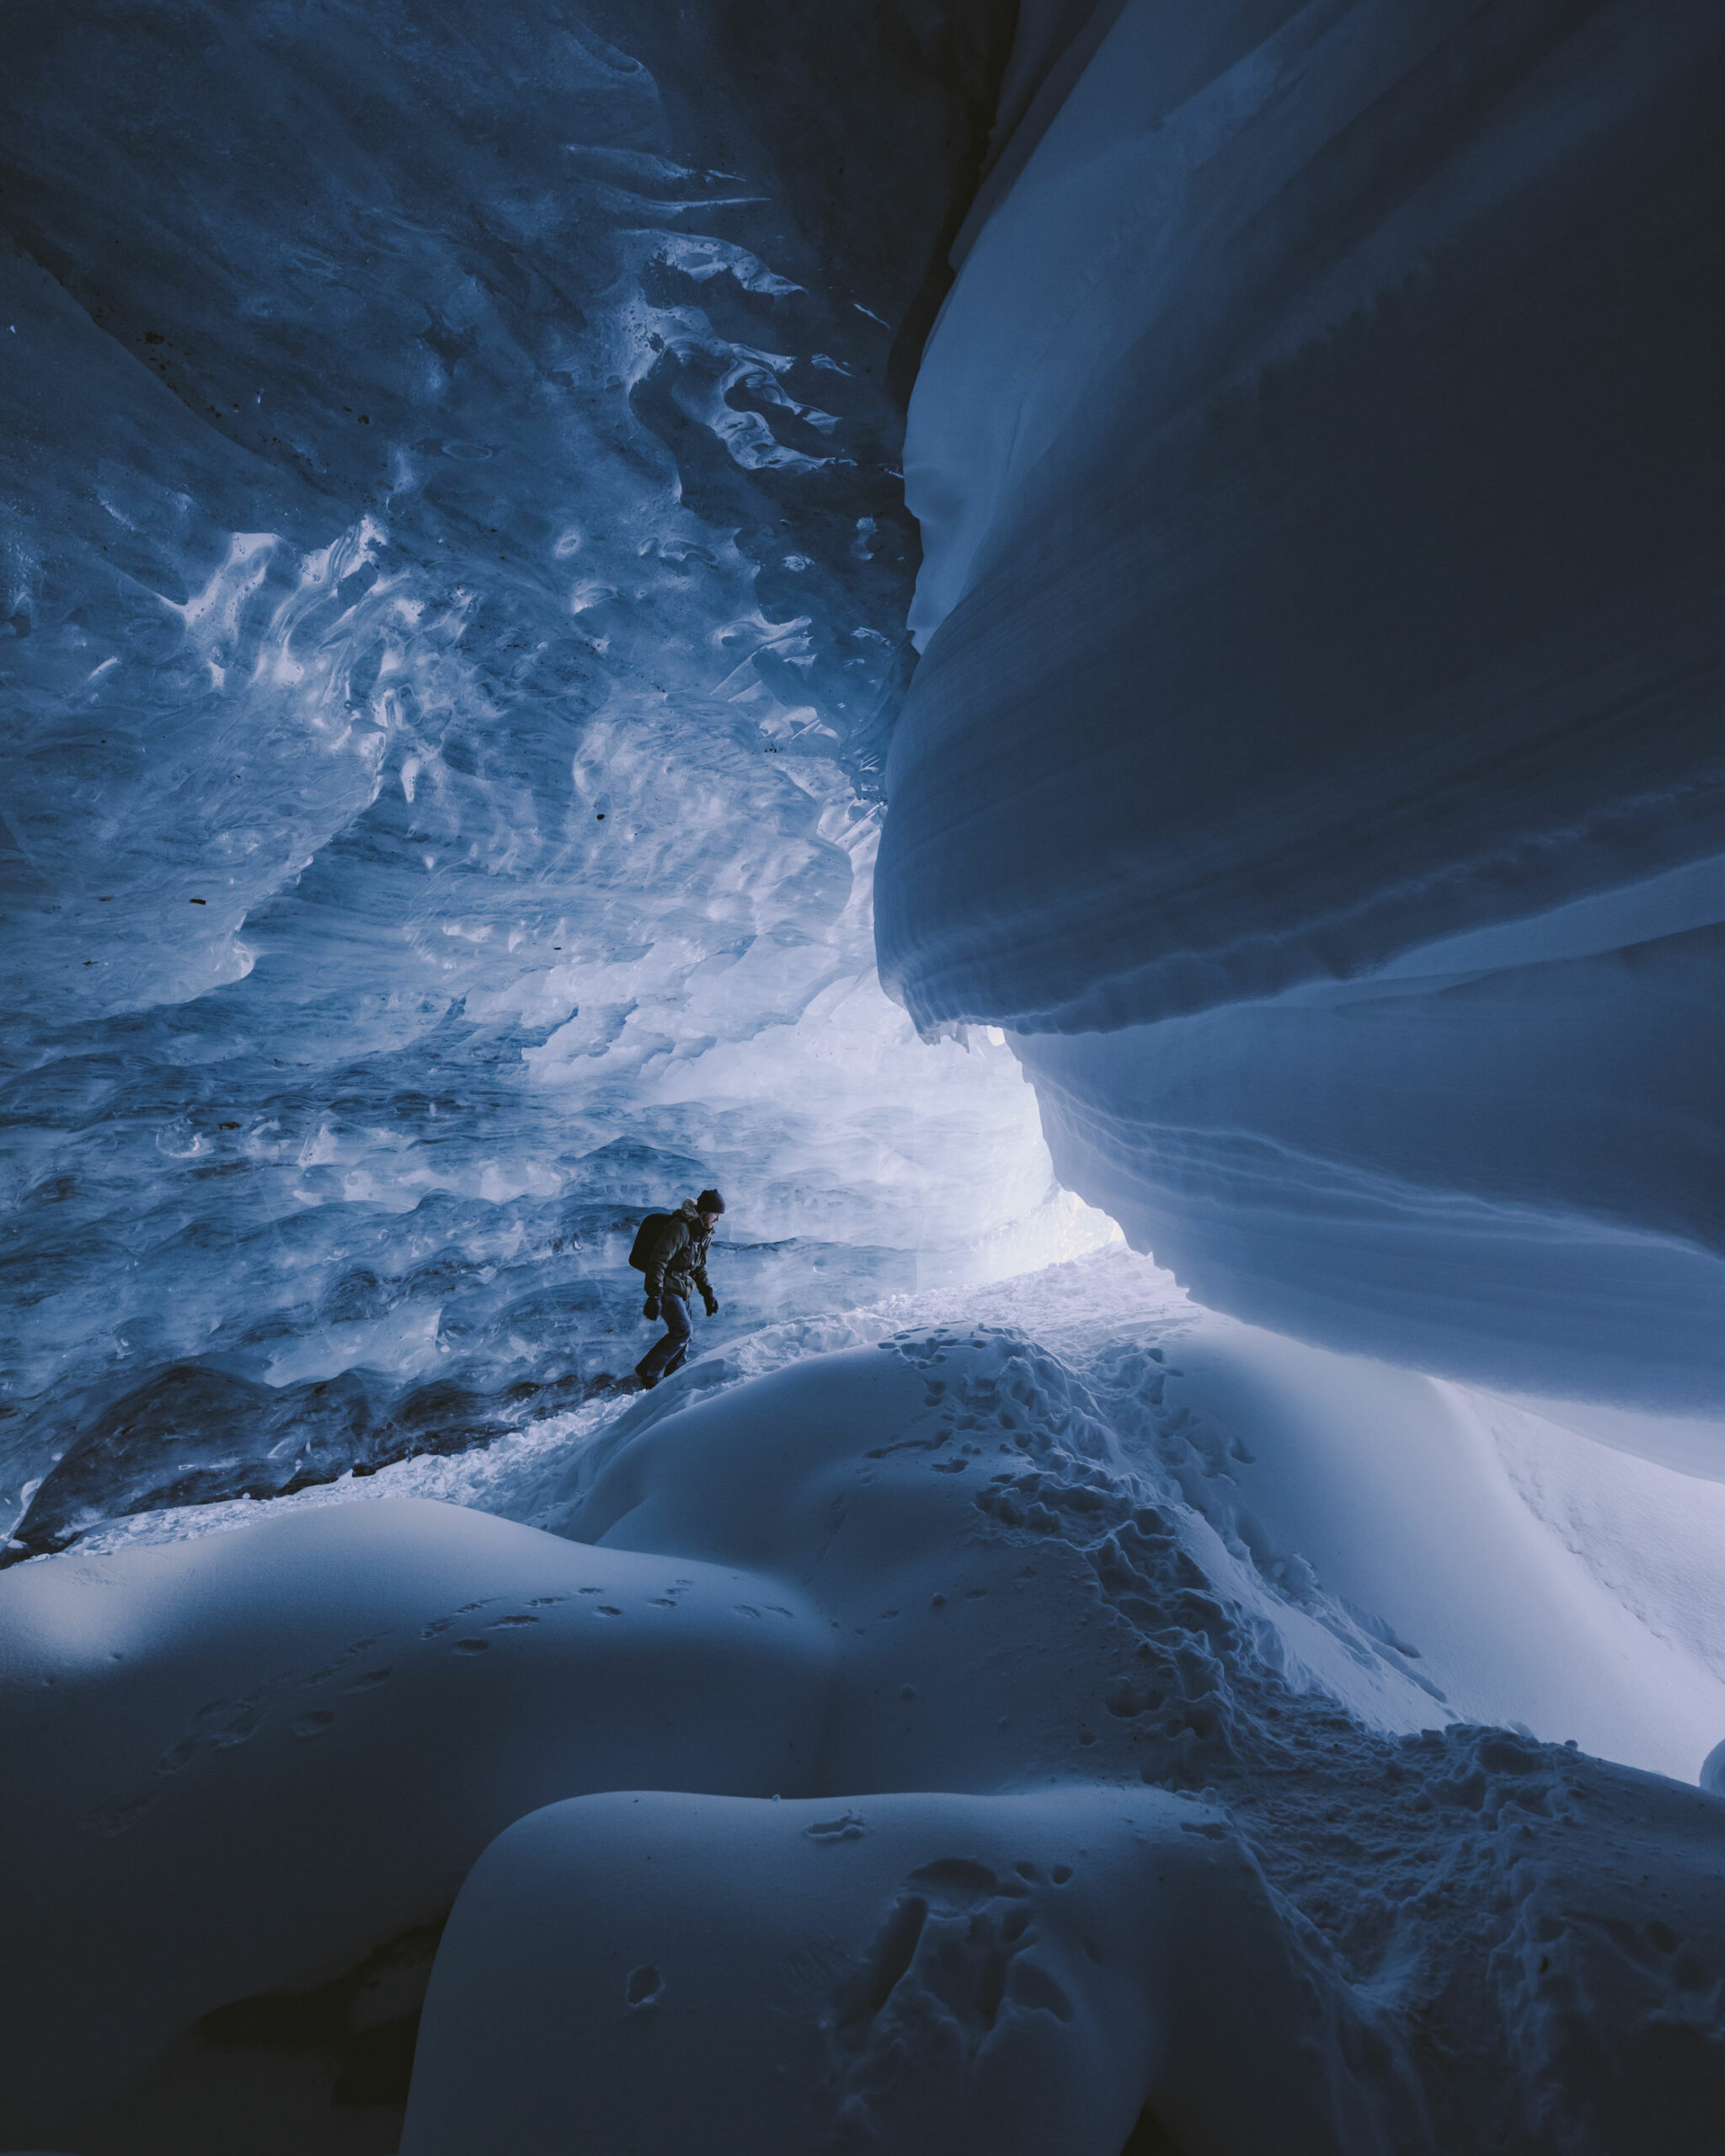 A person in an otherworldly looking ice cave in the magical world of snow and ice